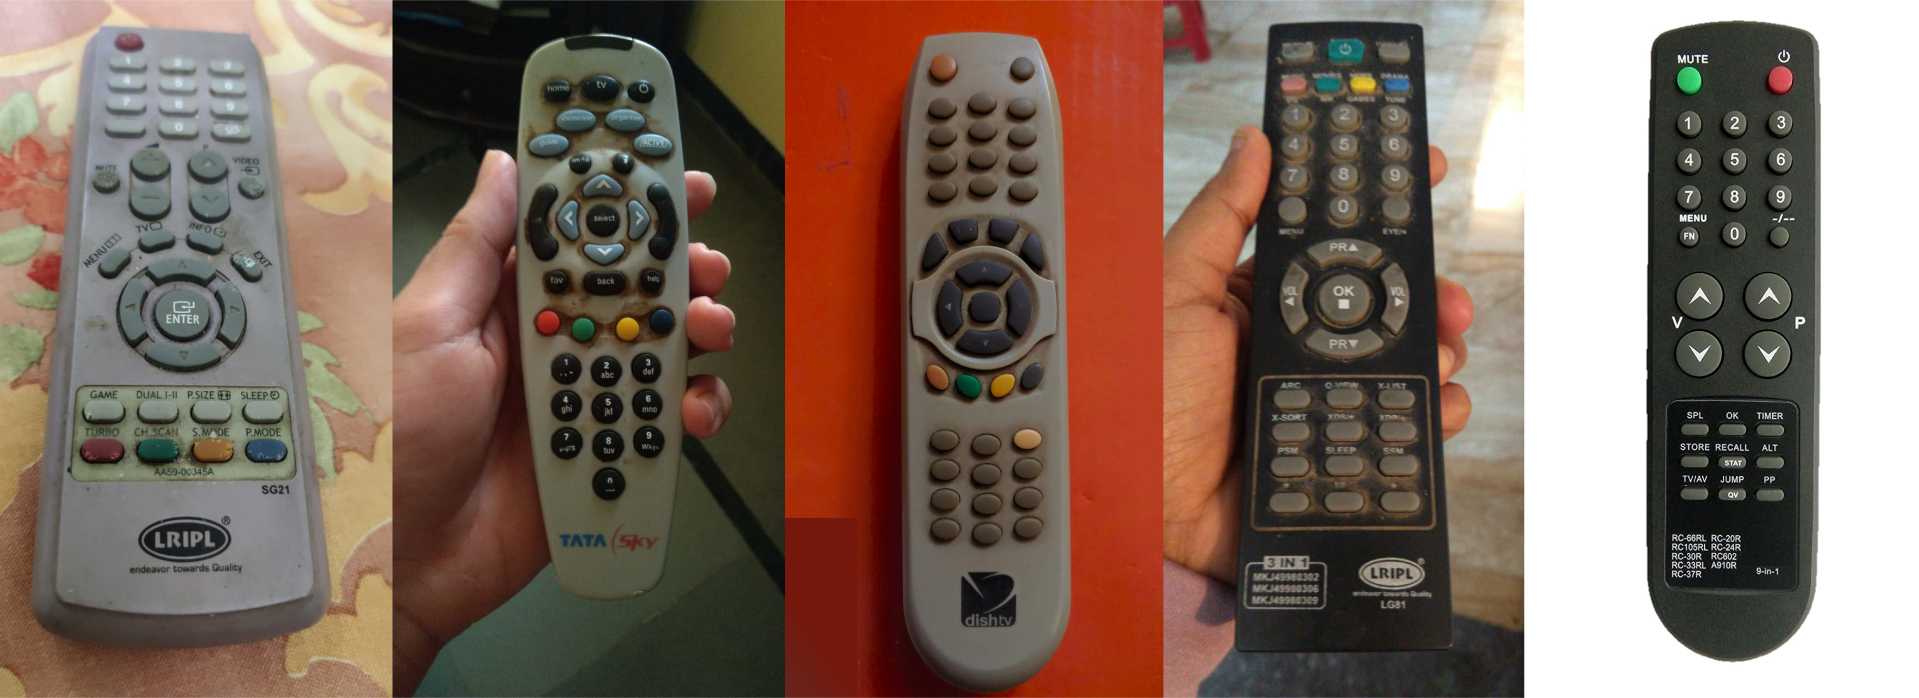 People's Choice winner remotes